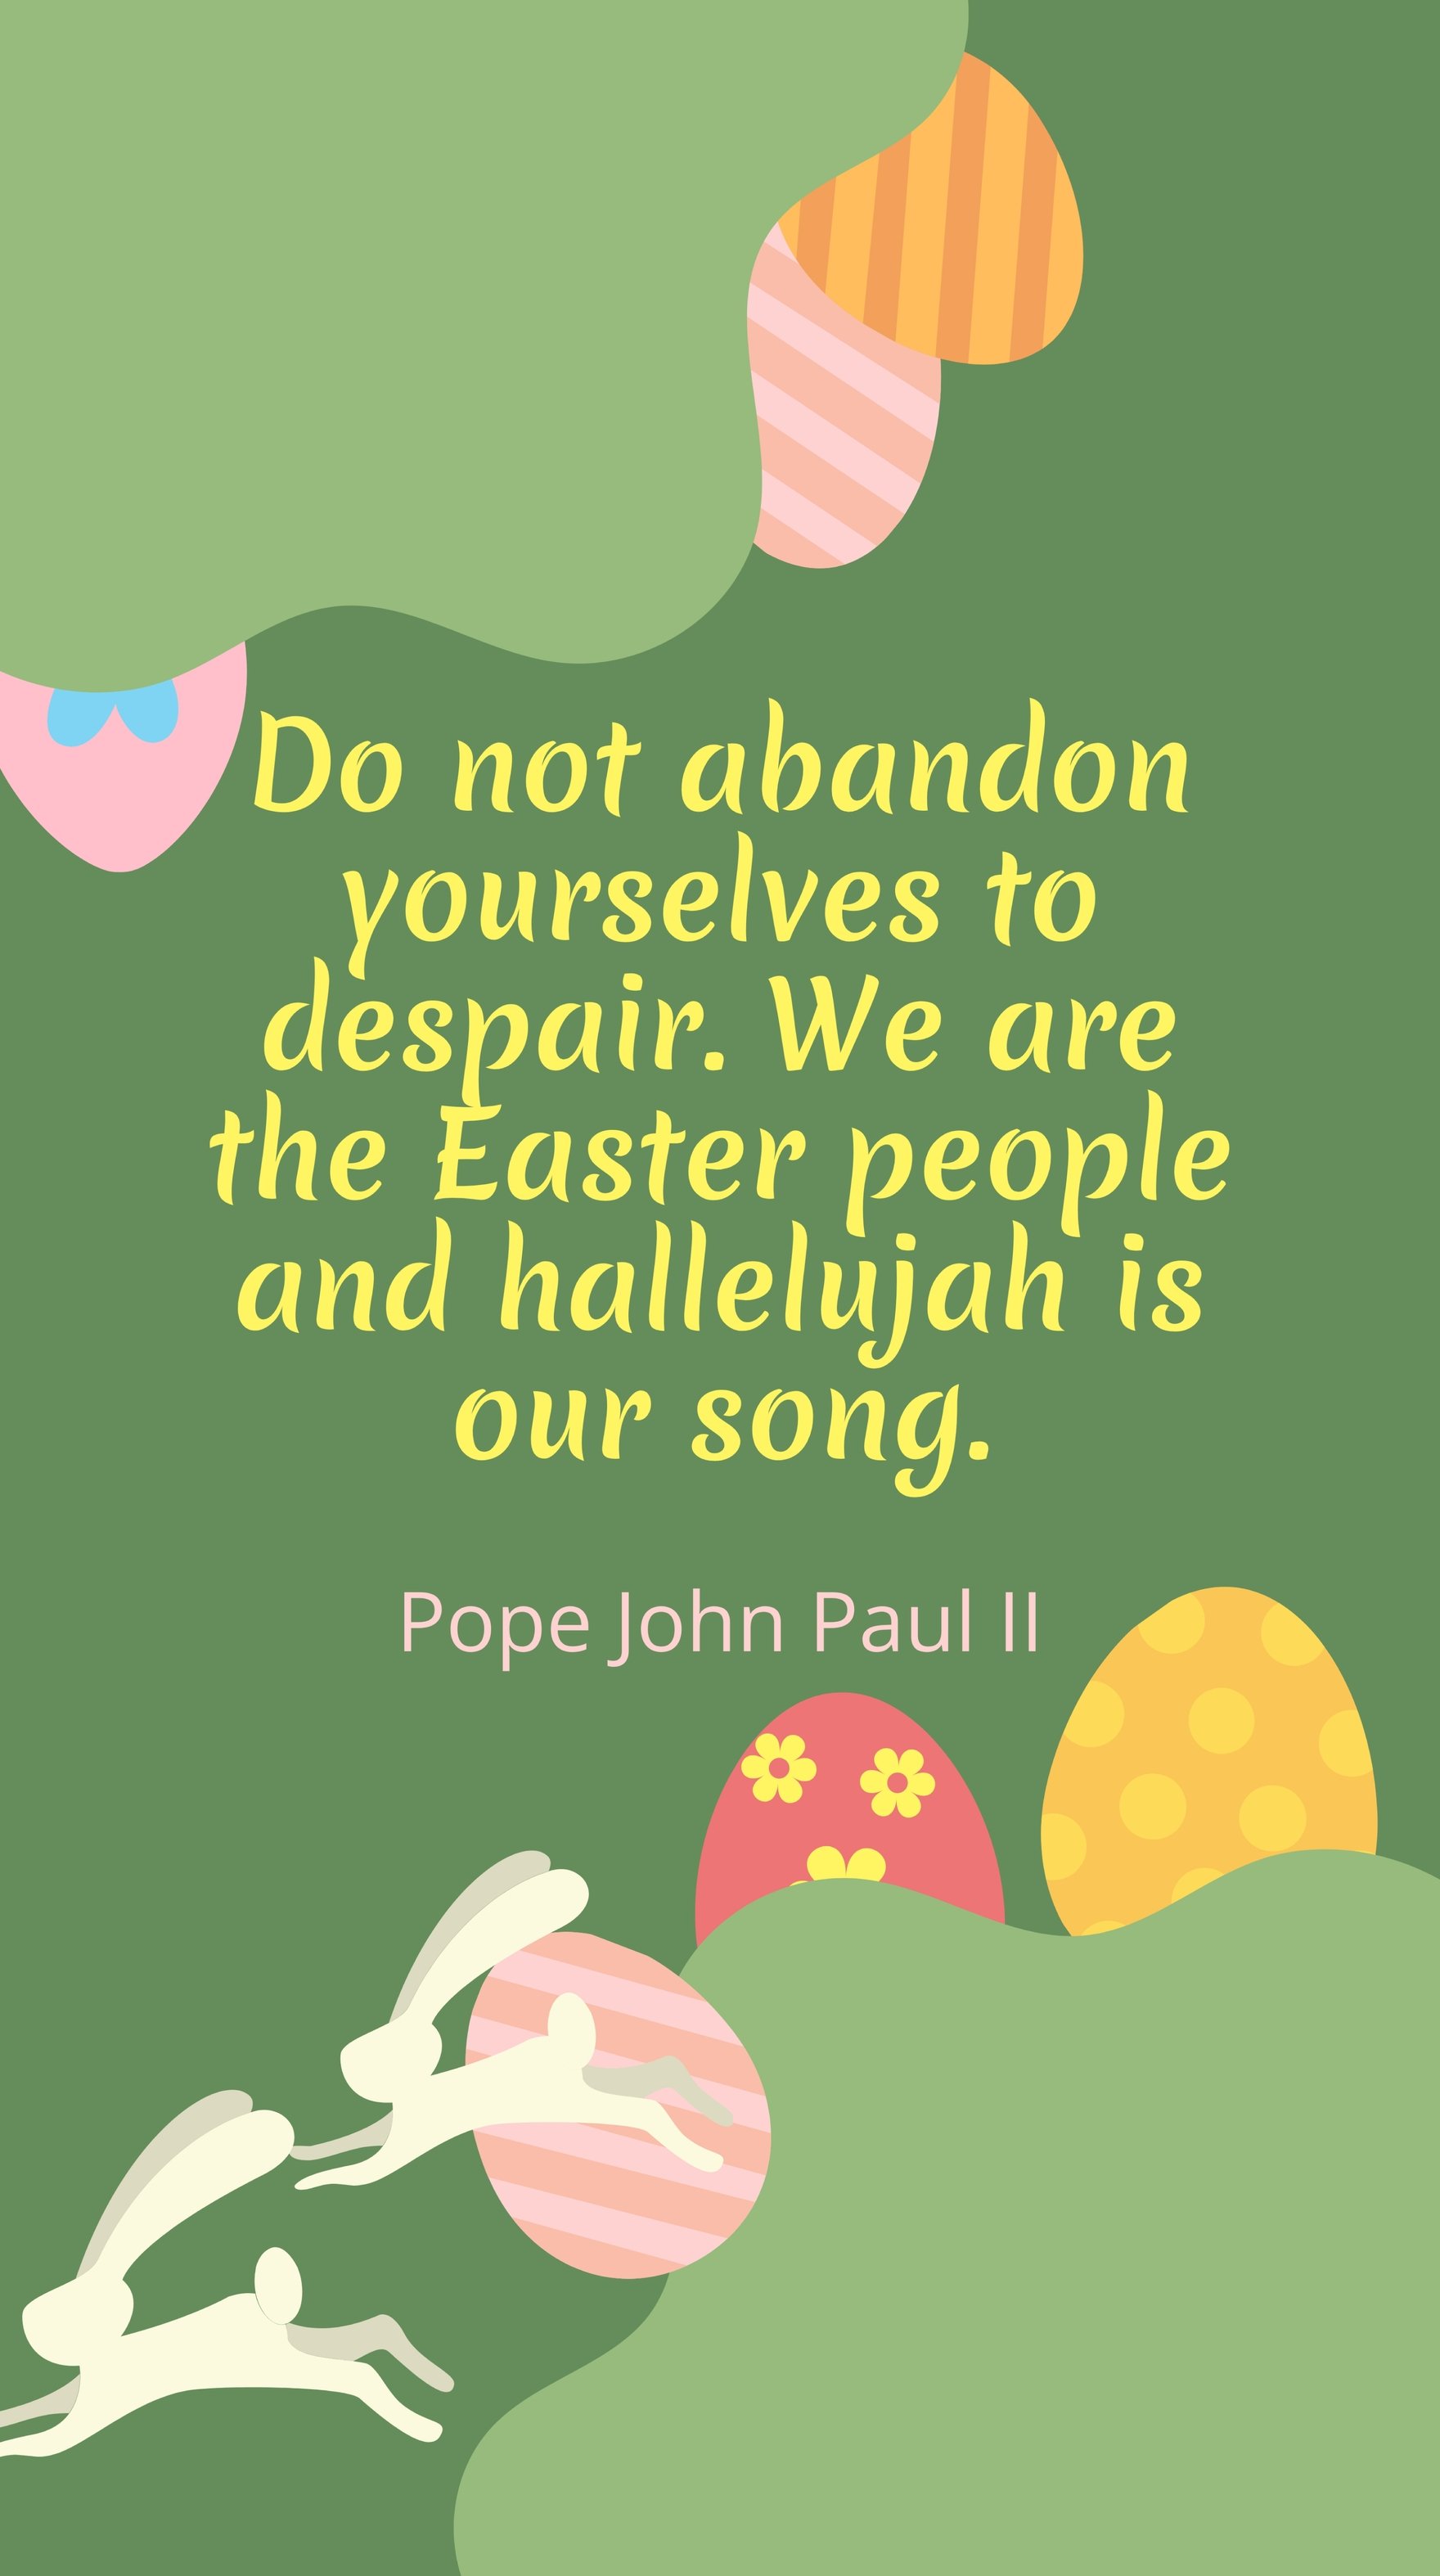 Free Pope John Paul II - Do not abandon yourselves to despair. We are the Easter people and hallelujah is our song.